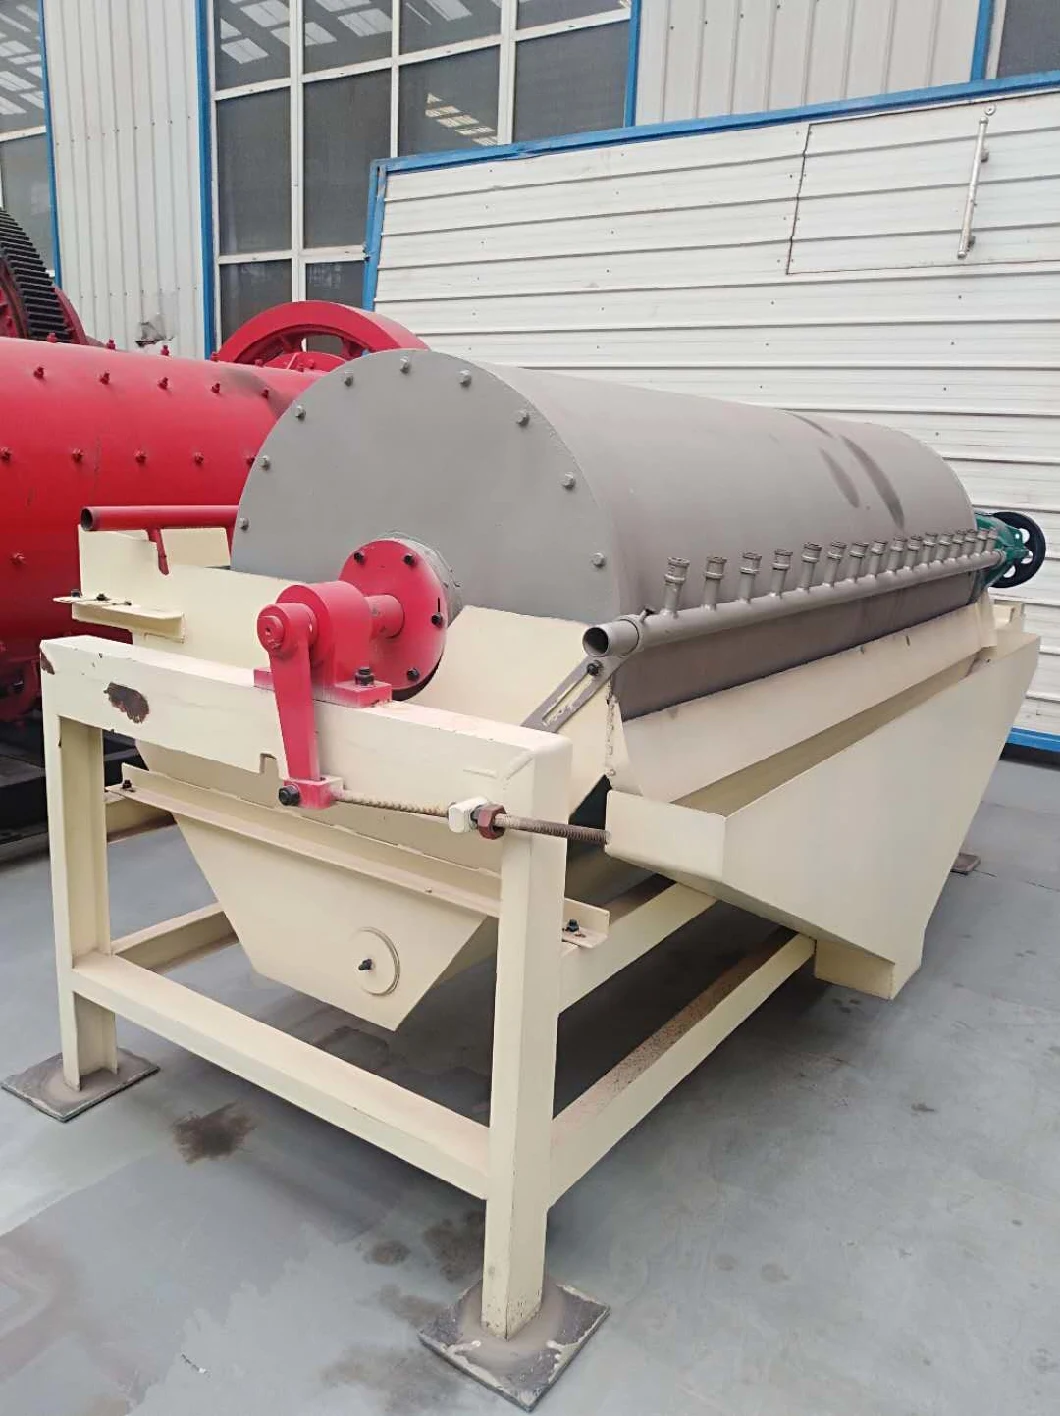 Mining Magnetic Separator Machine, Magnetic Drum Separator Machine for Silica Sand, Zircon Sand Processing Project